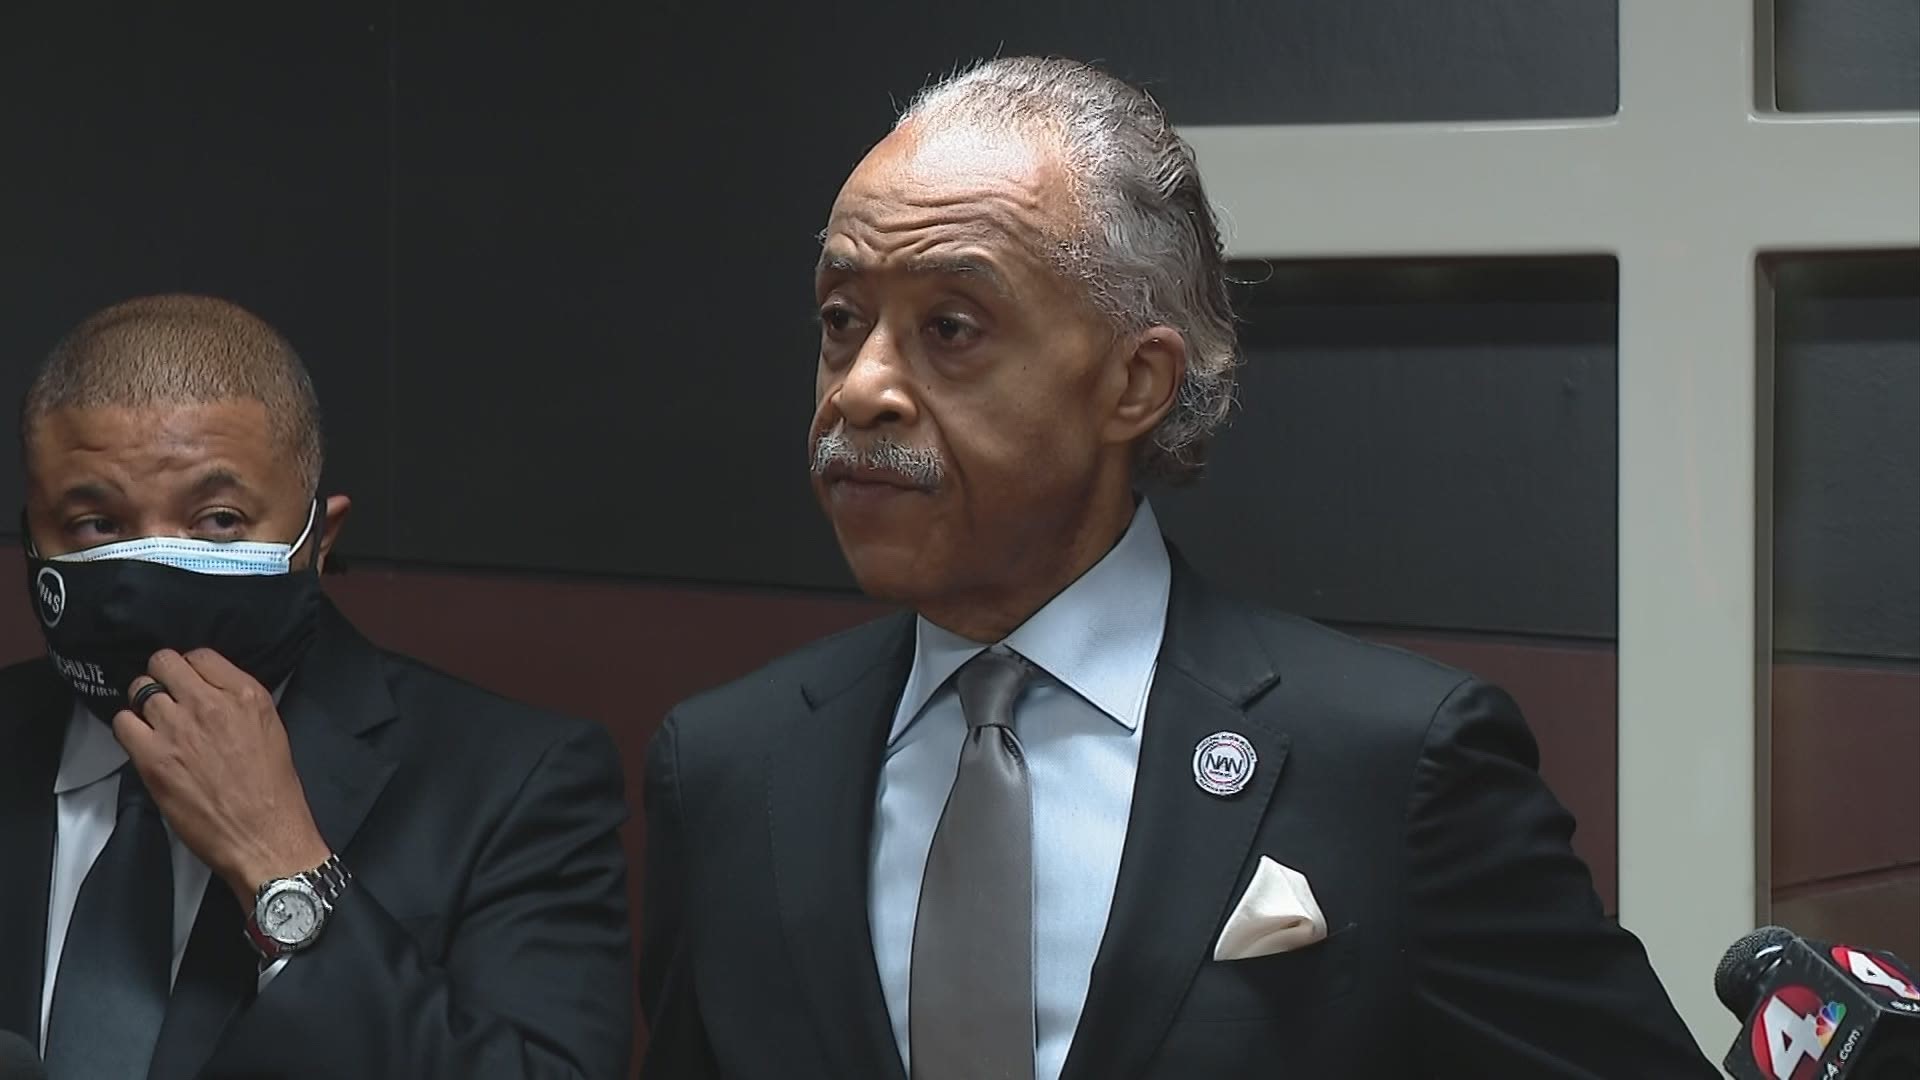 Reverend Al Sharpton said there needs to be reimplementing of police reform.